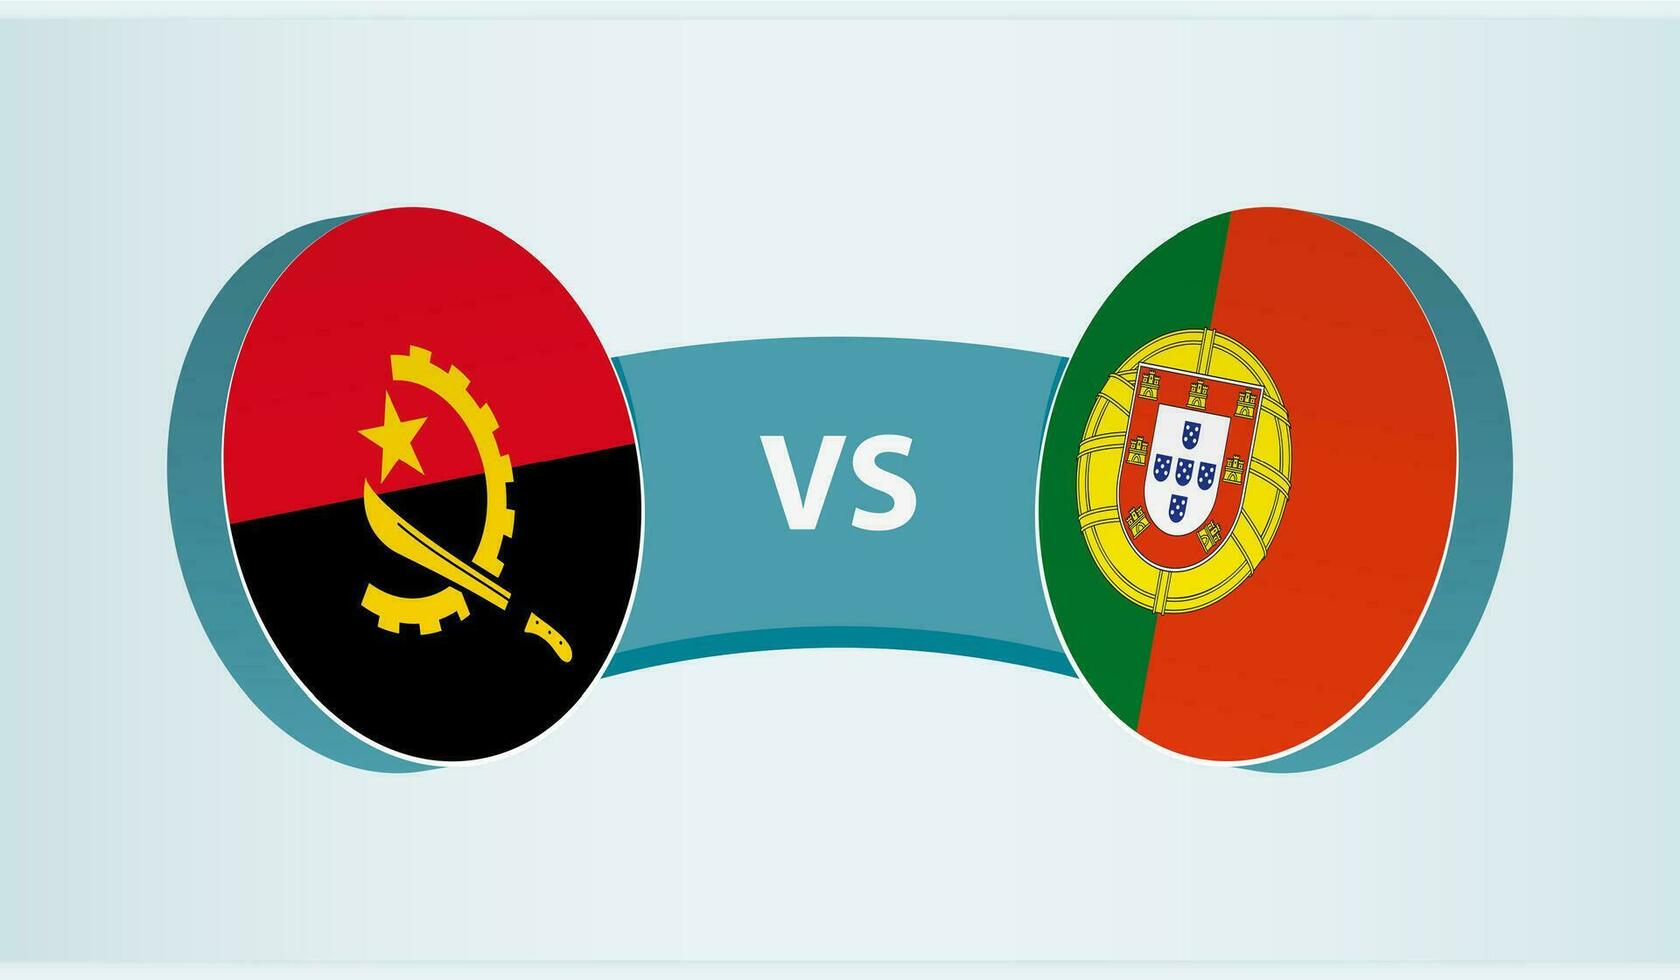 Angola versus Portugal, team sports competition concept. vector